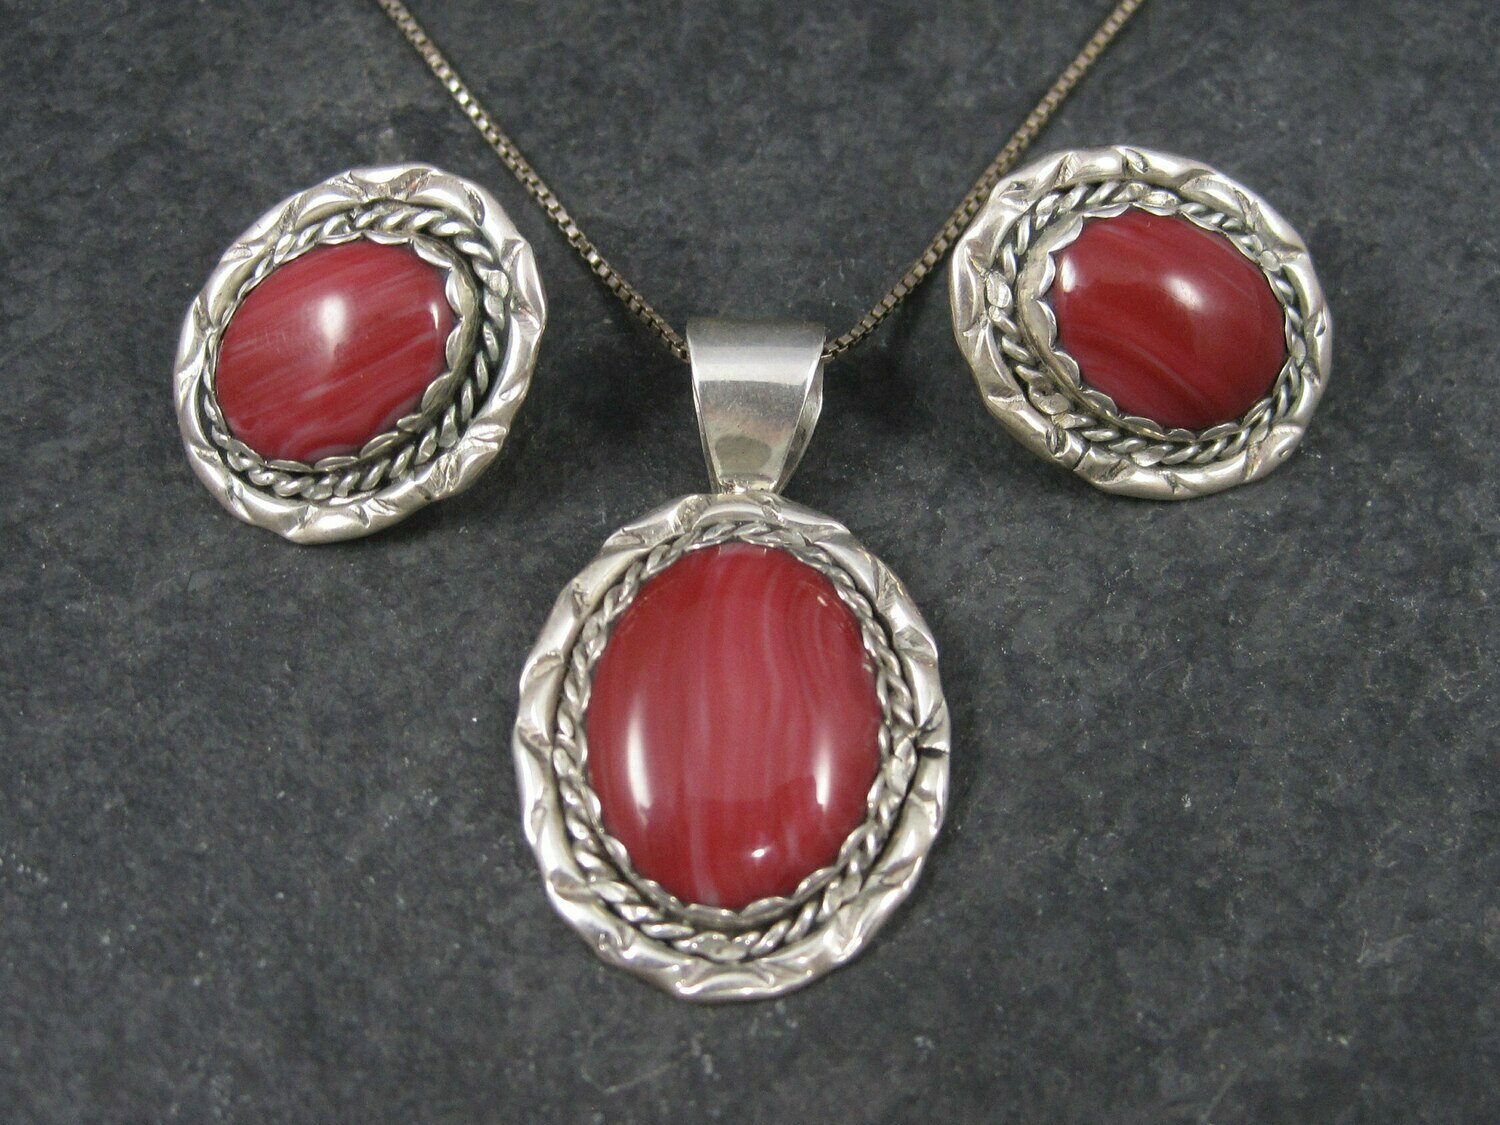 Vintage Navajo Red Spiny Oyster Pendant and Earrings Jewelry Set Ellen Dubois